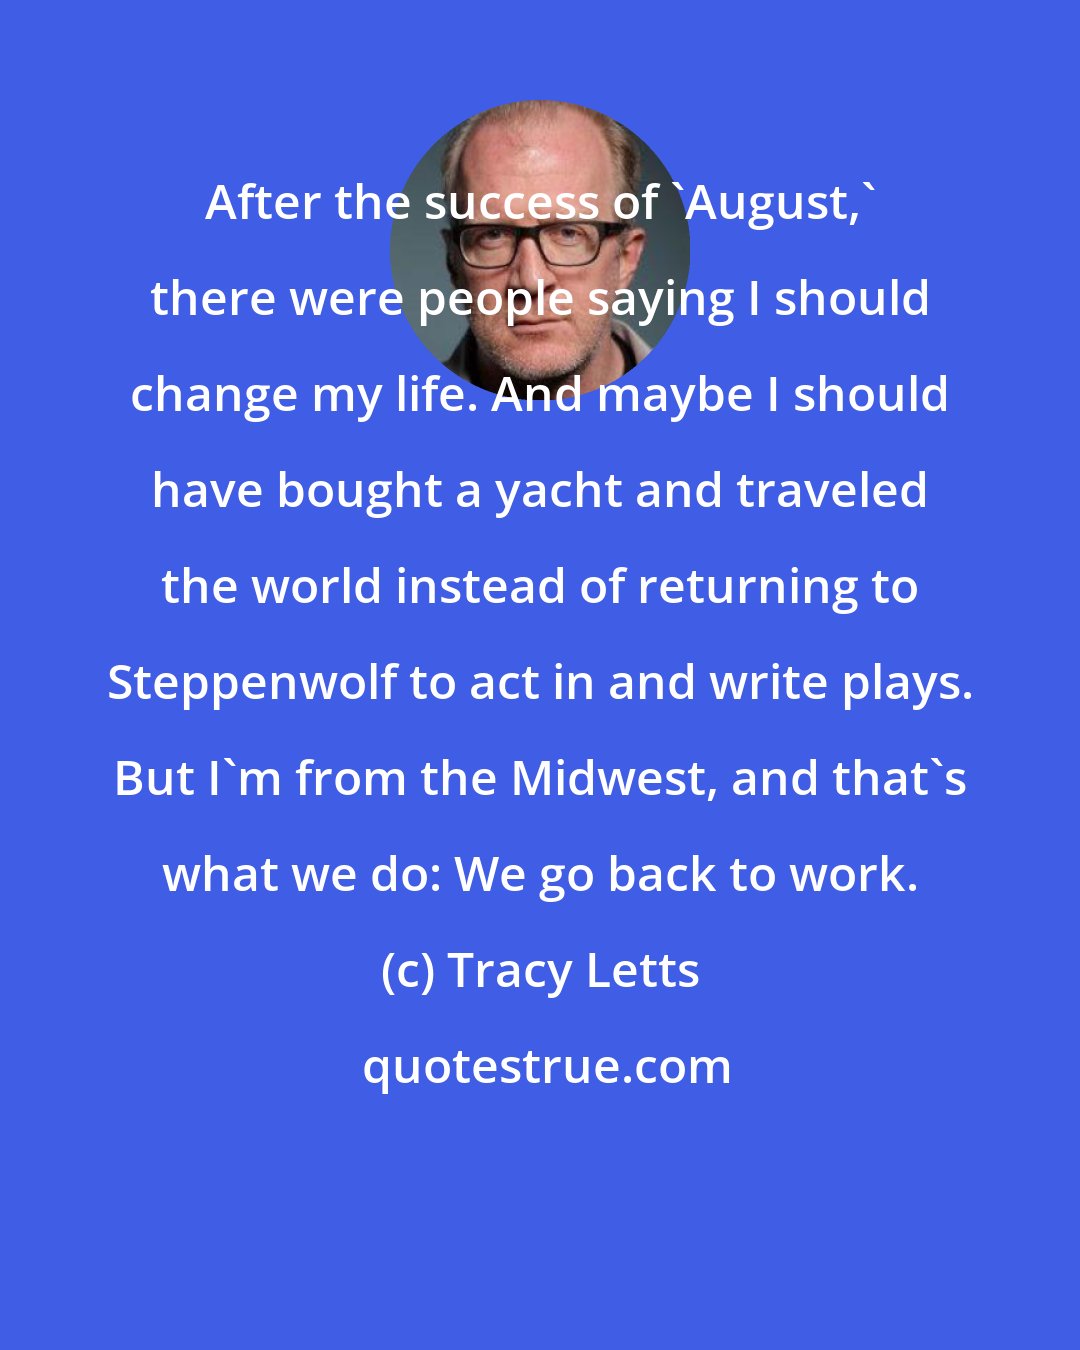 Tracy Letts: After the success of 'August,' there were people saying I should change my life. And maybe I should have bought a yacht and traveled the world instead of returning to Steppenwolf to act in and write plays. But I'm from the Midwest, and that's what we do: We go back to work.